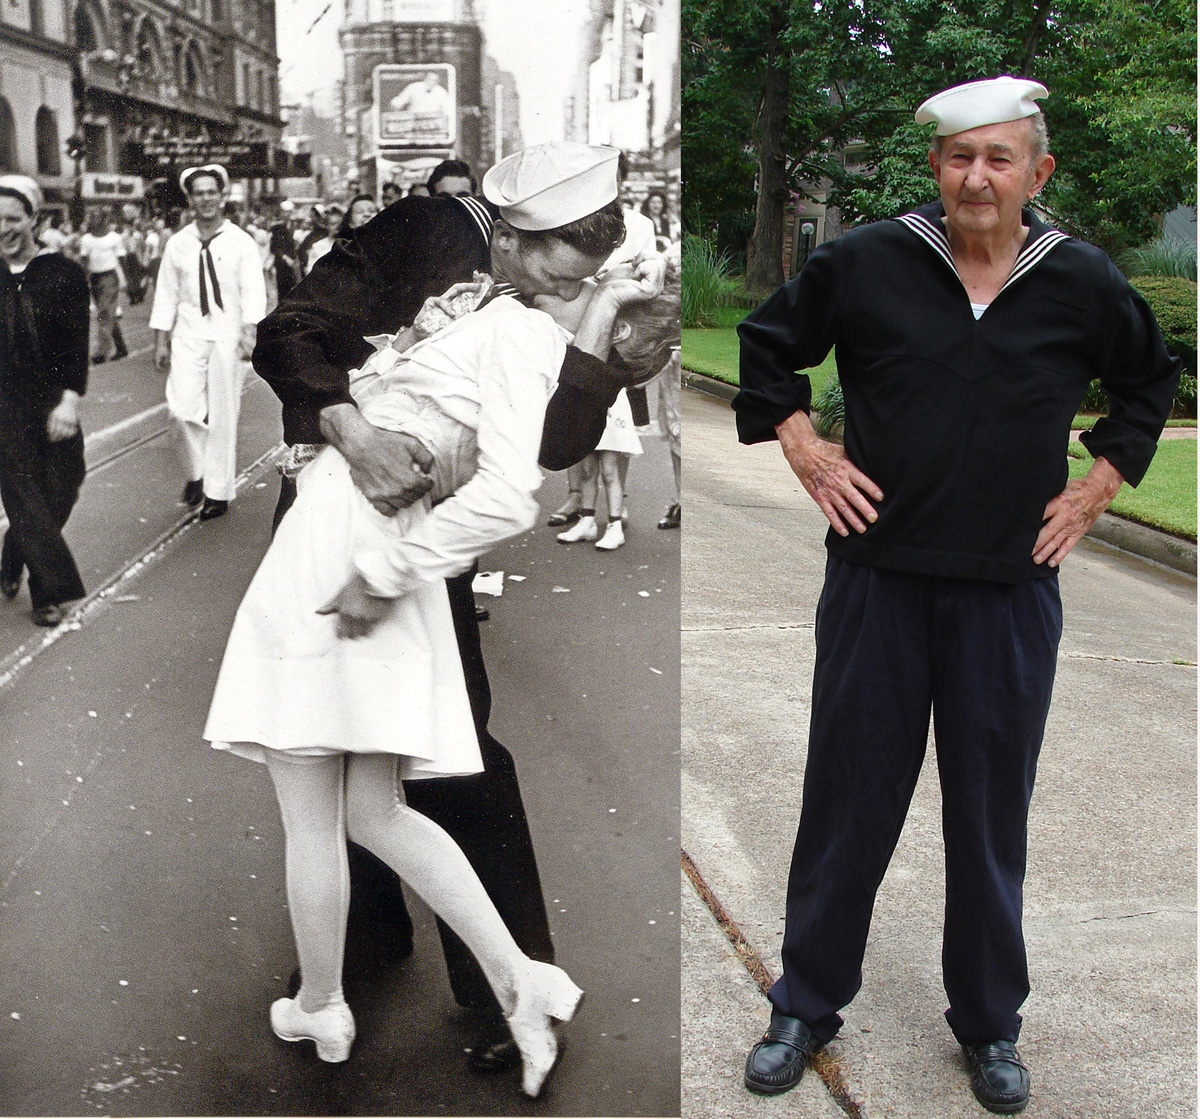 The Real "kissing Sailor" Glen McDuffie, from the famous World War II photo, dies aged 86